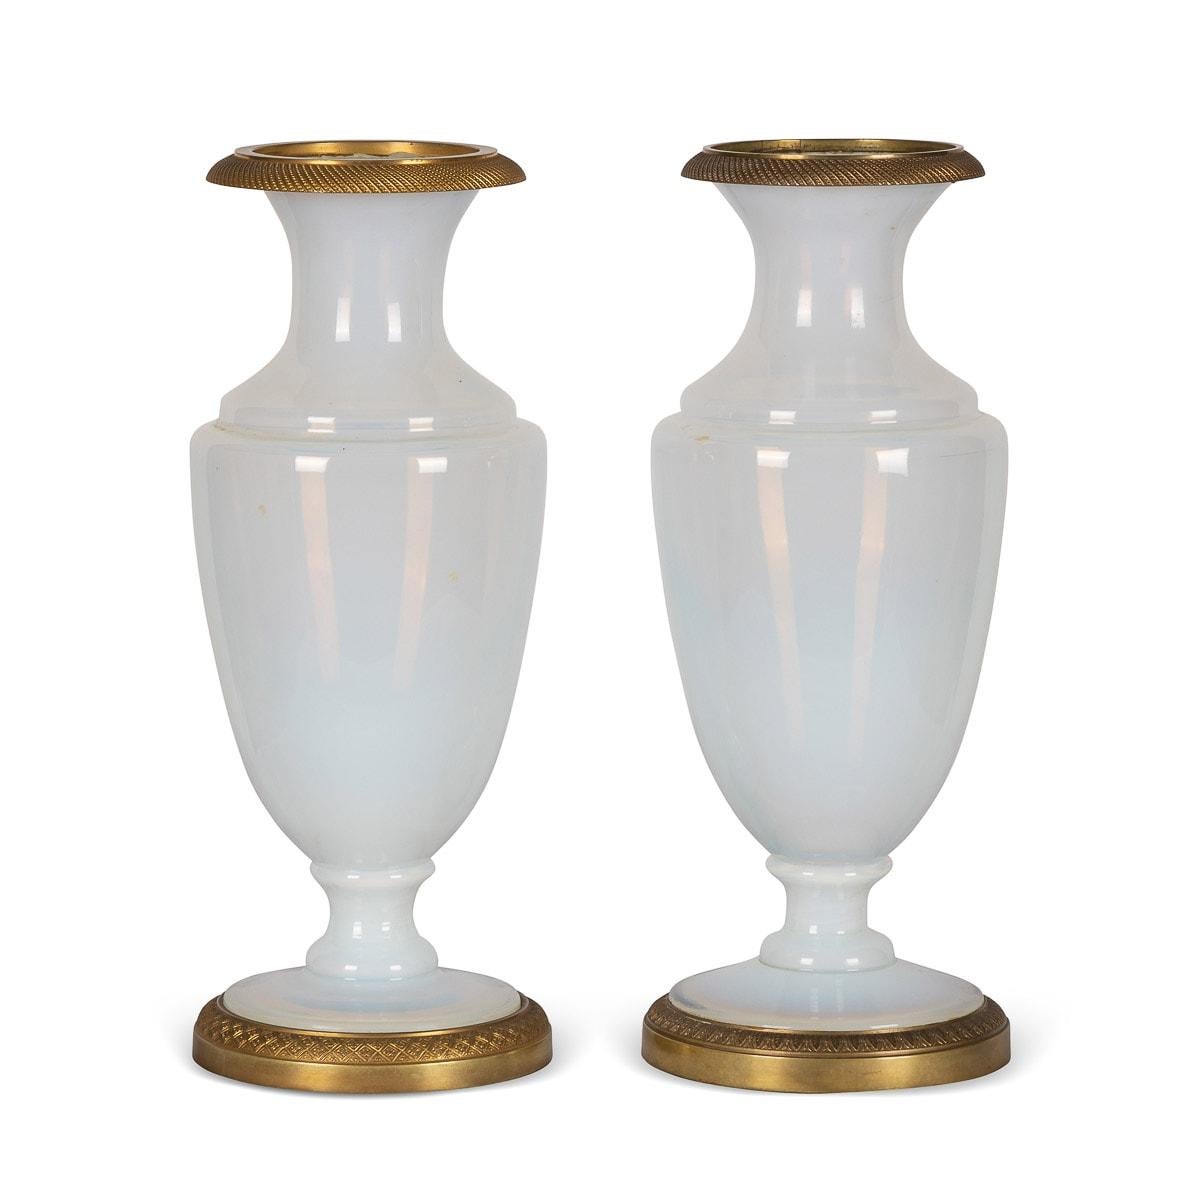 Antique early-19th Century French pair of Ormolu mounted opaline vases, of baluster shape with trumpet necks and stepped circular feet. The rim mount is cast in Ormolu, with beading pattern and the base has a floral leaf design. The overall finish